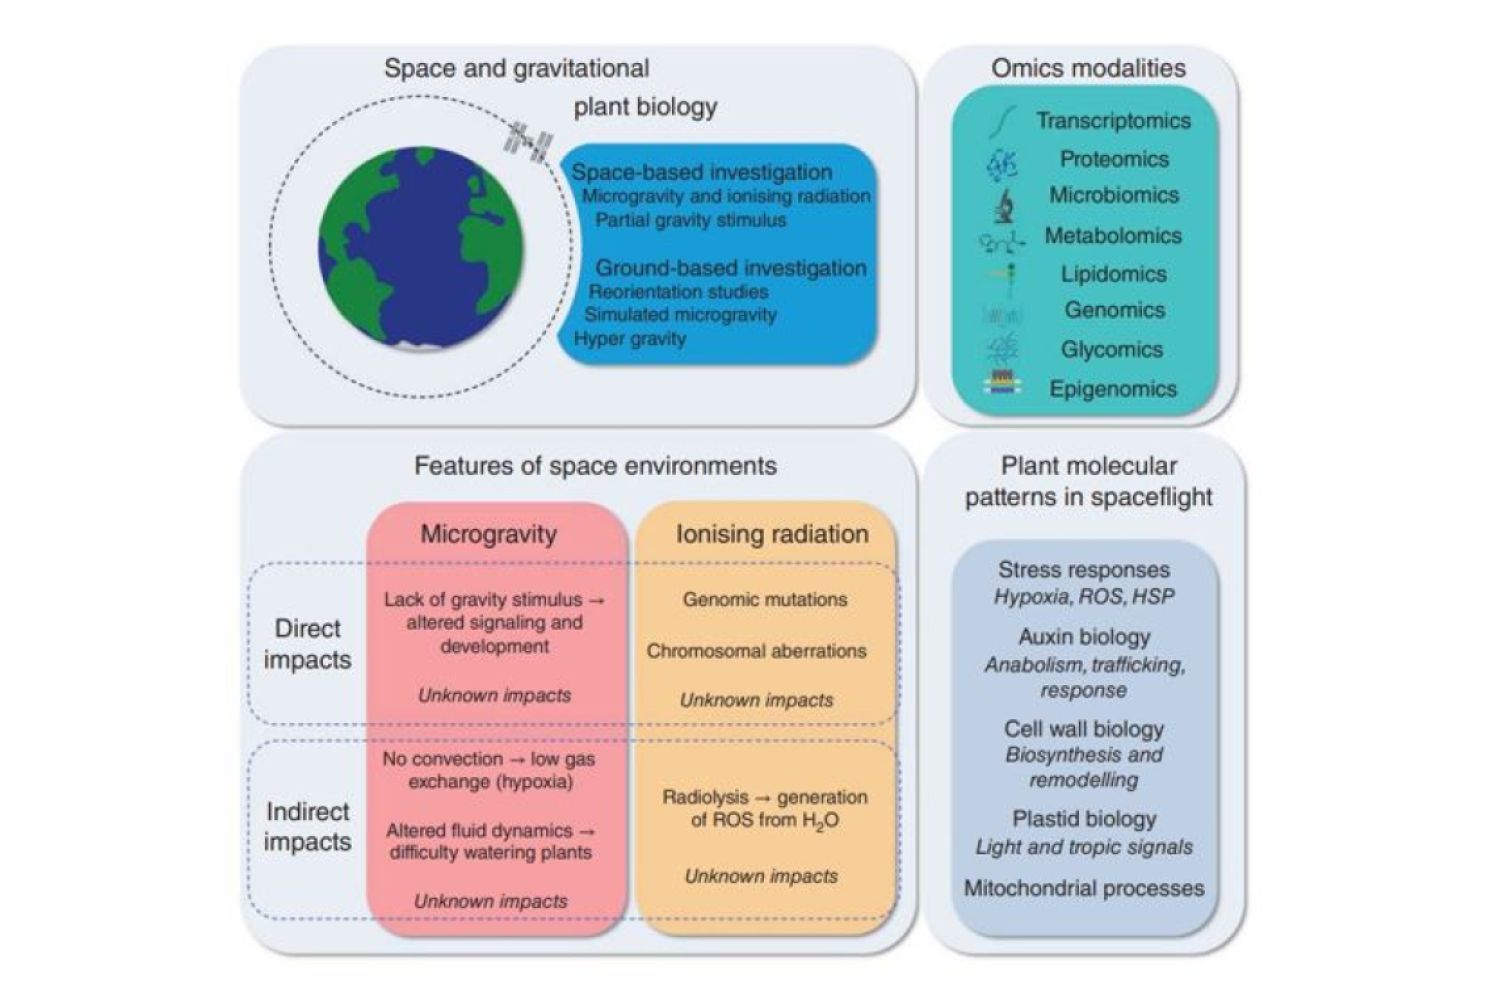 Overview of plant biology in space.